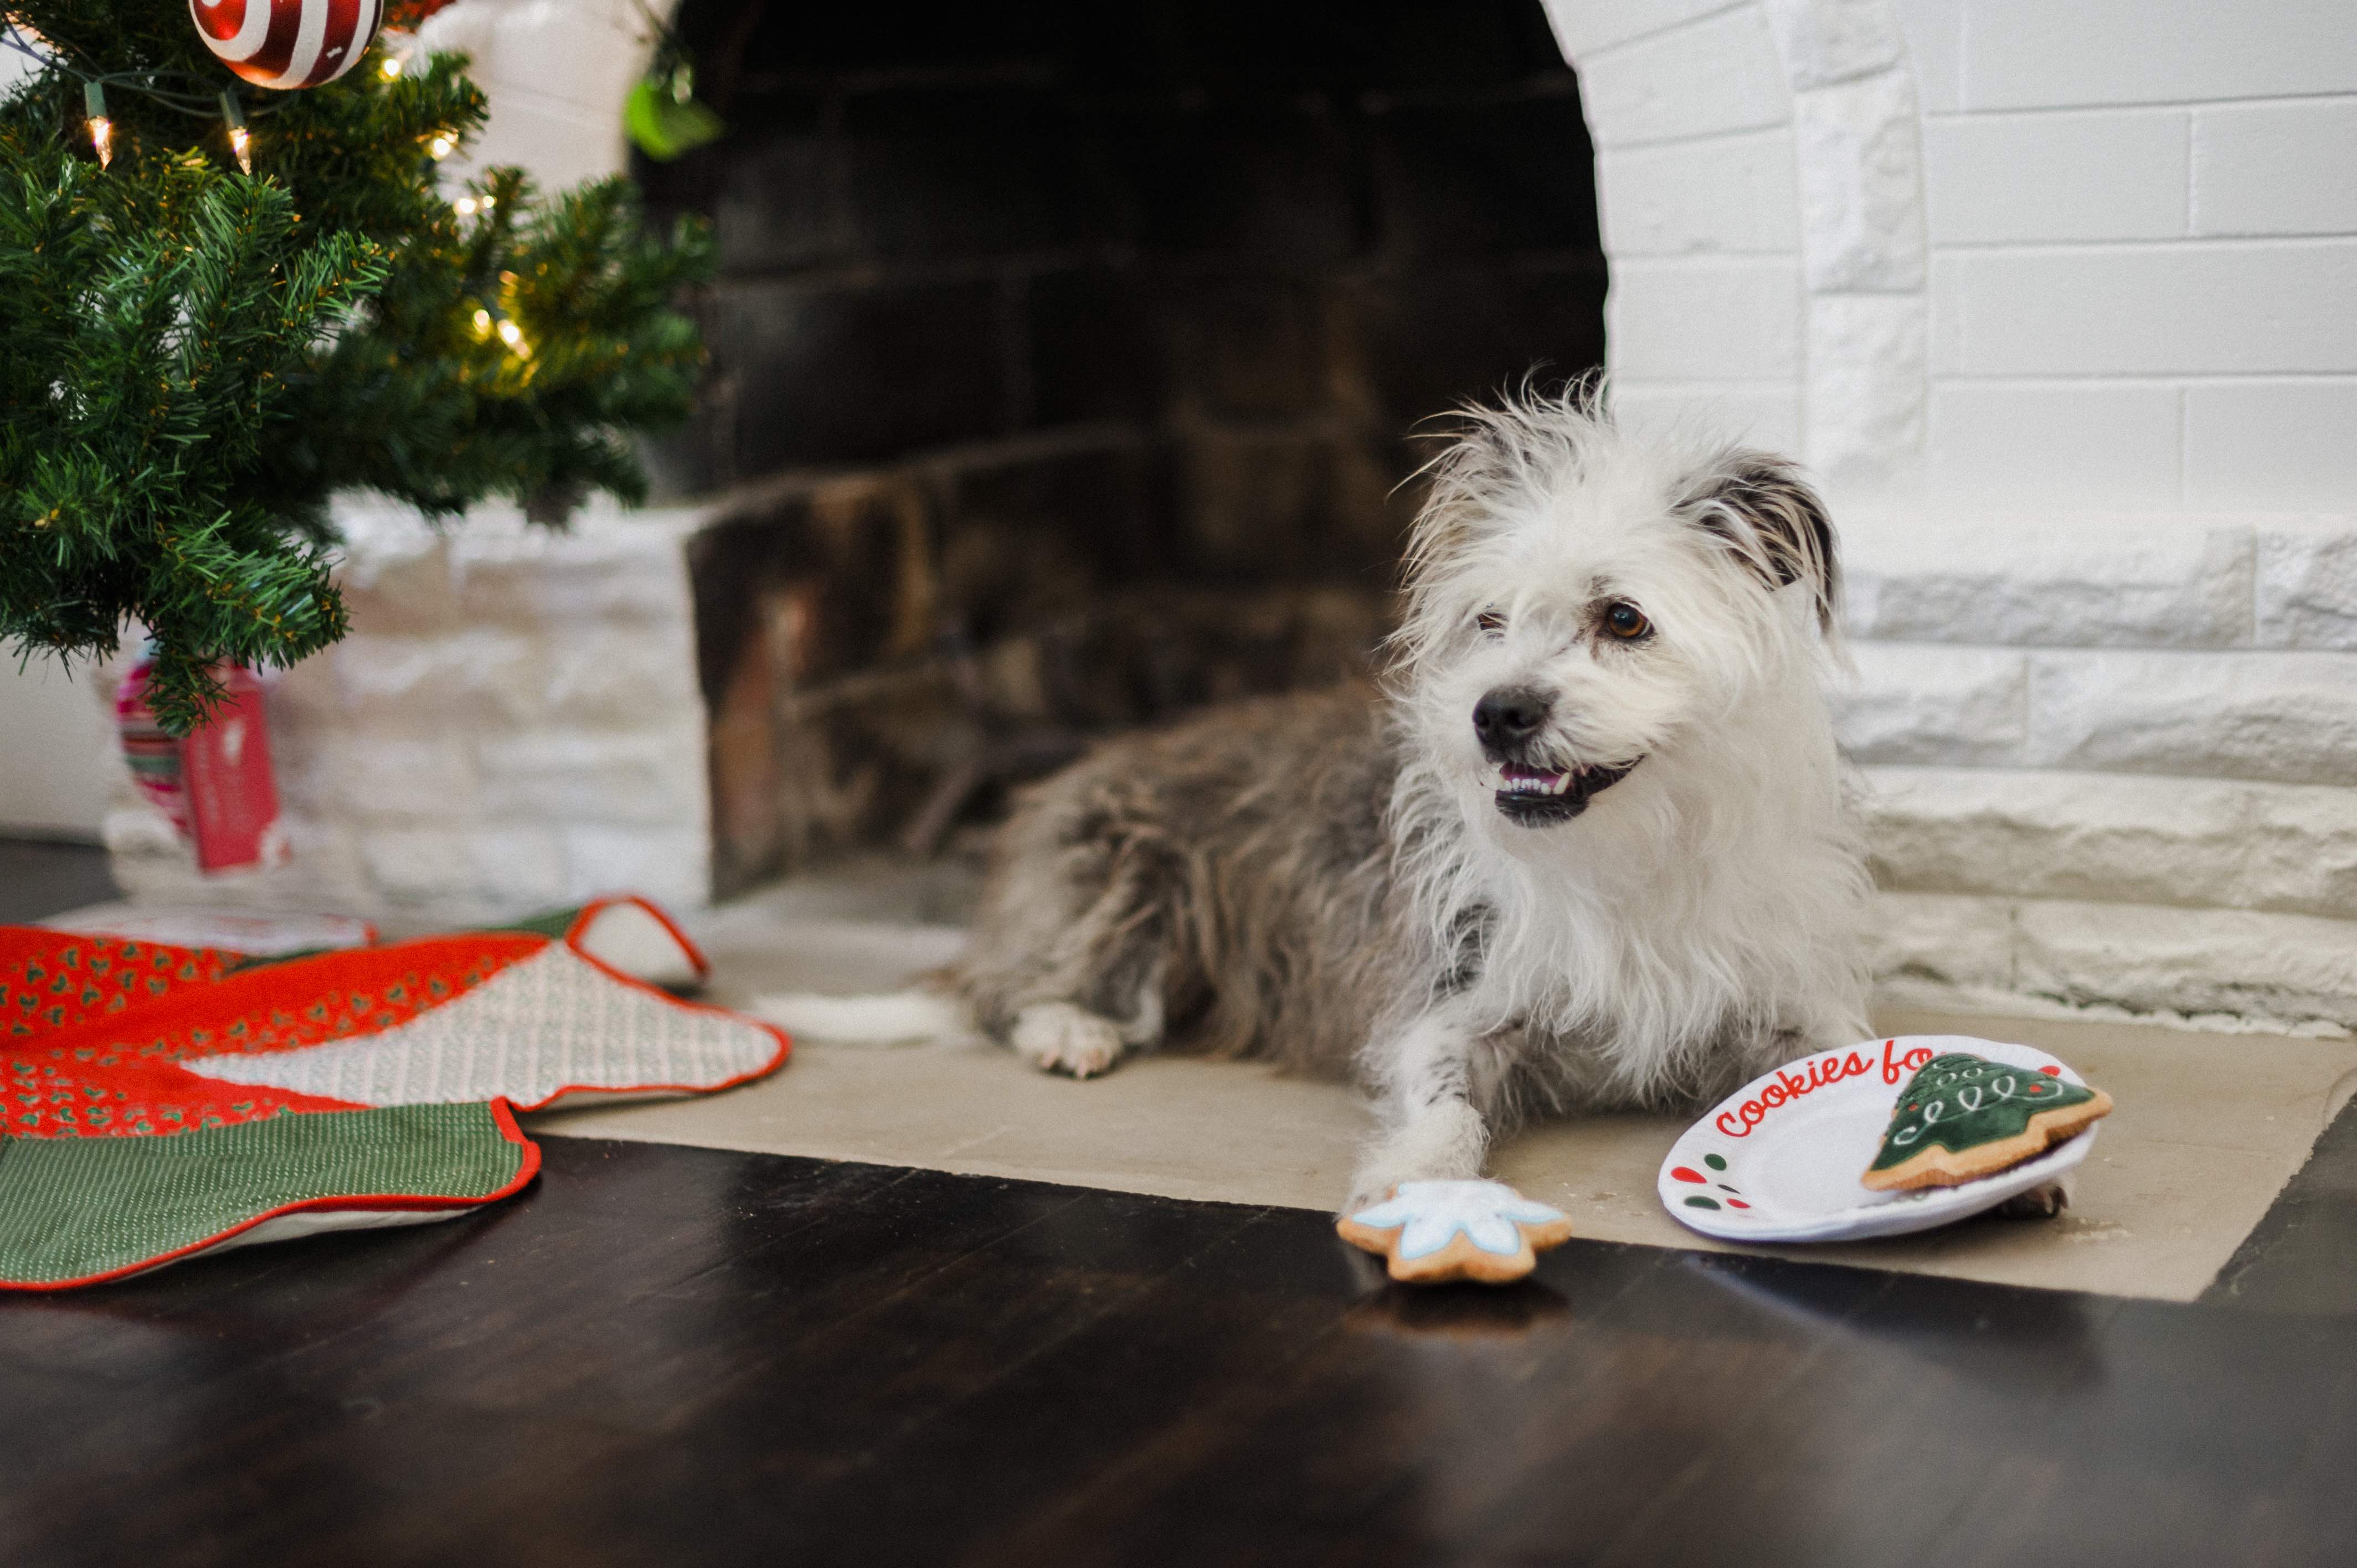 P.L.A.Y. Merry Woofmas Dog Plush toys: Christmas Eve Cookies